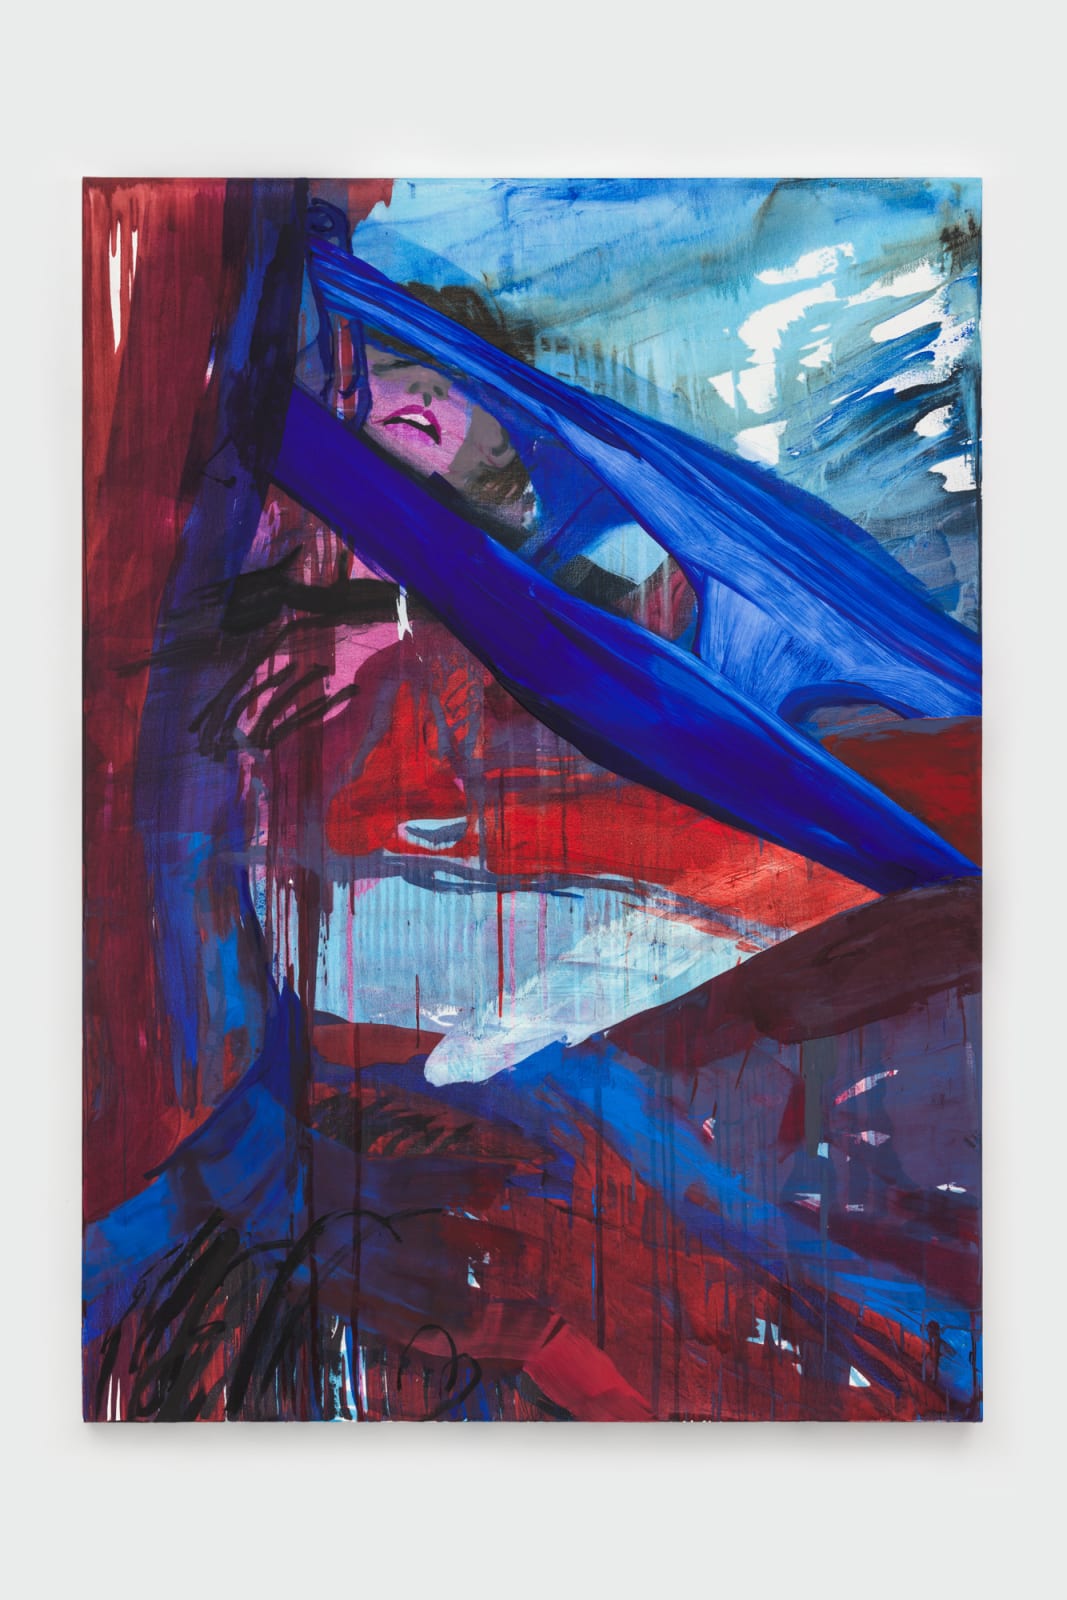 A tall canvas composed of swooping motion and contrasting diagonals. A streak of crimson down the left side and across the bottom frame an inset brighter zone, filled with lines, imagery and washy poolwater blue. This dreamy zone is cut with a large sharp shape, painted economically with shadows that make it pop into vivid three dimensions. The shape could be the top of a hammer, the turned leg of a wooden chair or the familiar stretched fabric of pulled-down panties observed from above. Through a hole in the shape, a small cartoonish face calls out, one closed eye, little nostrils and an open mouth with distinctly pink, parted lips. Whatever noise she's emitting travels through the painting, reverberating in hidden body parts - a hand gripping crotch, foot curling backwards. All the while a wall of drips giving the images a sense of sliding downwards as it rises up.